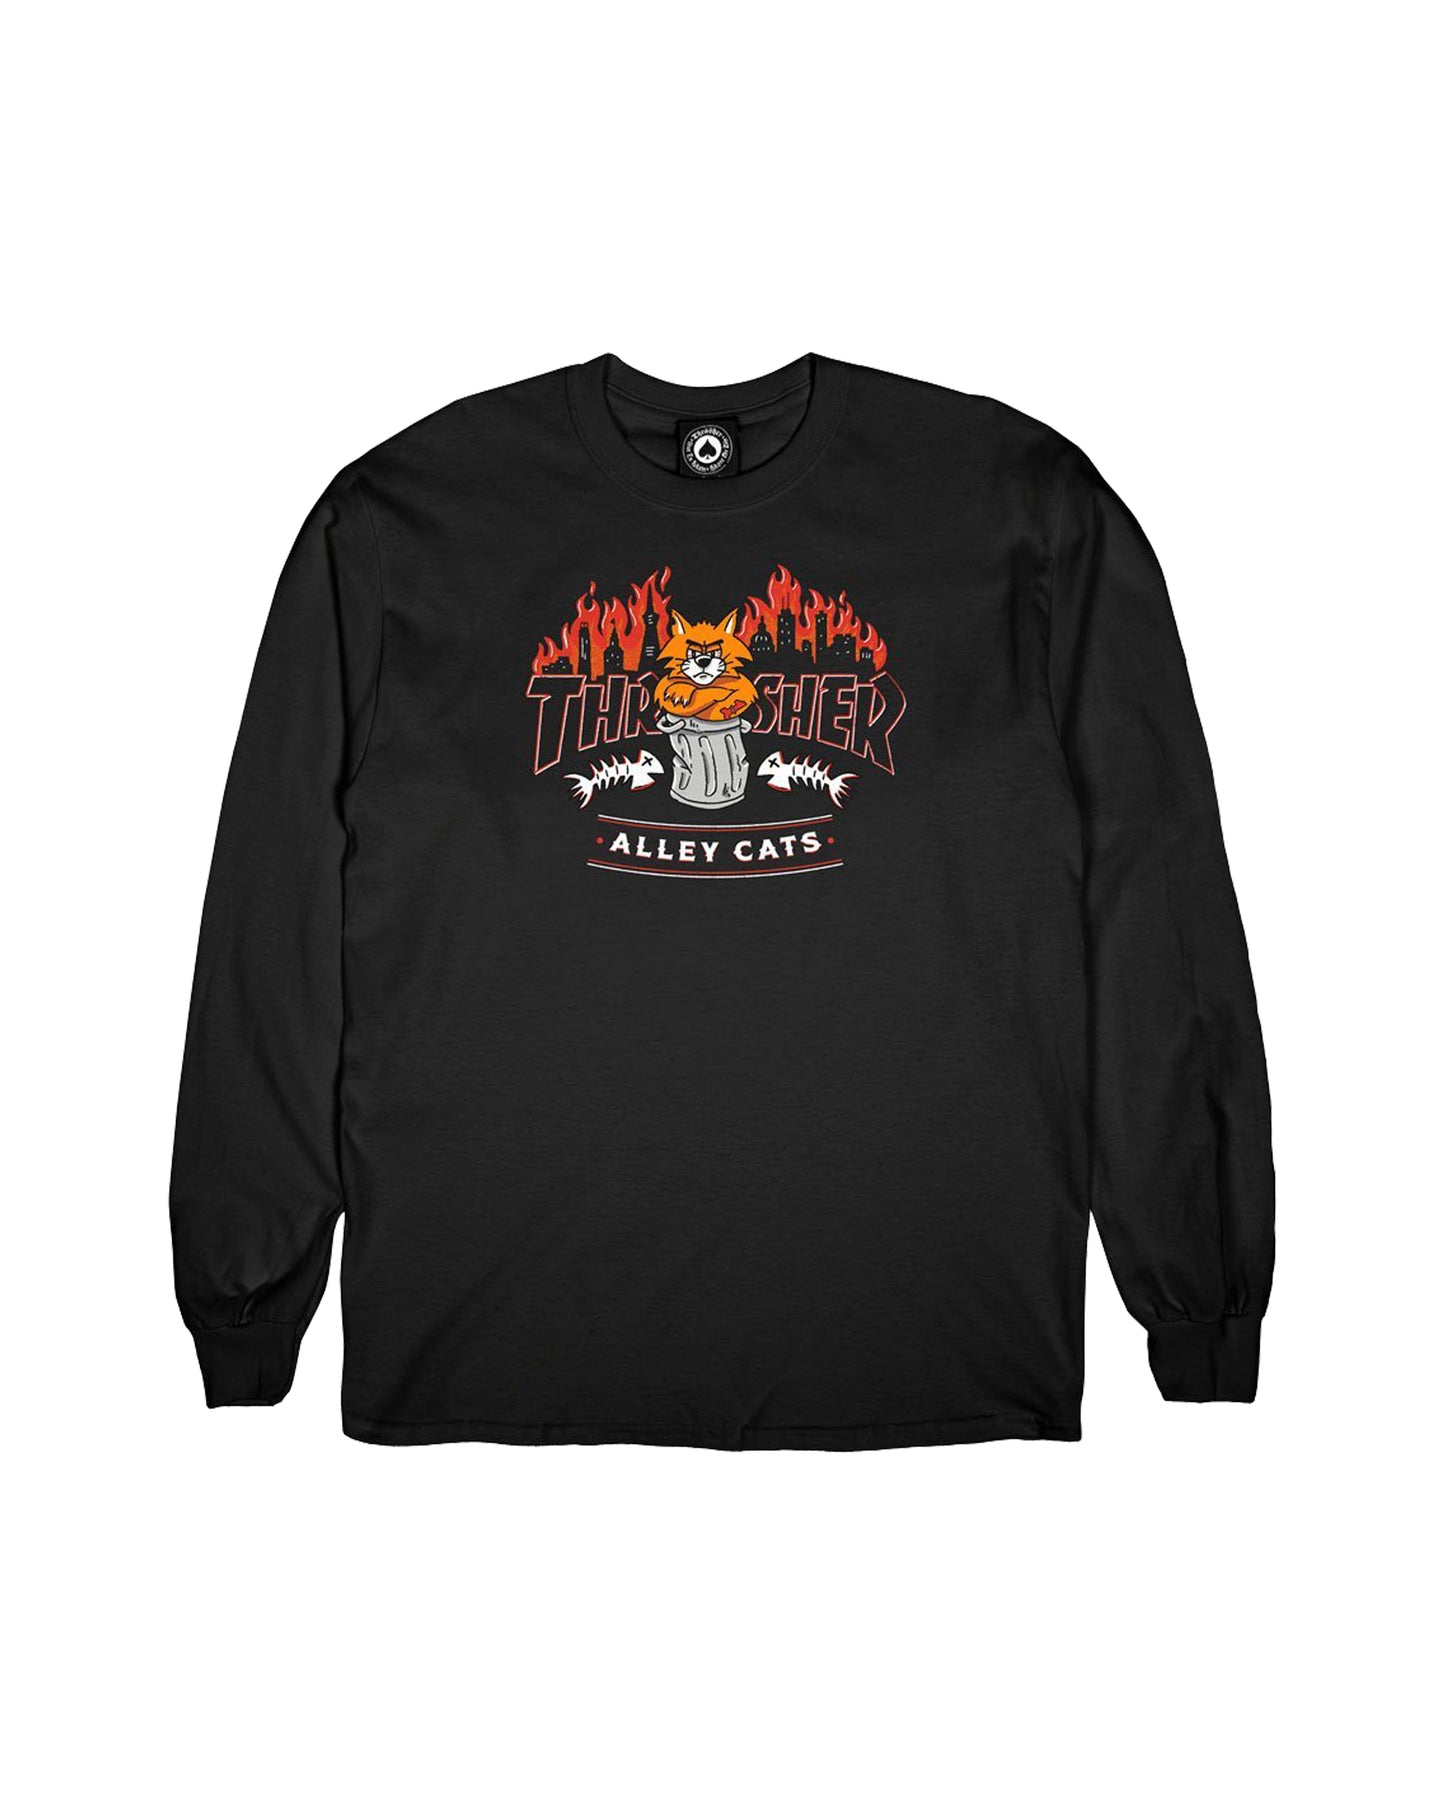 THRASHER ALLEY CATS LS BLACK TEE